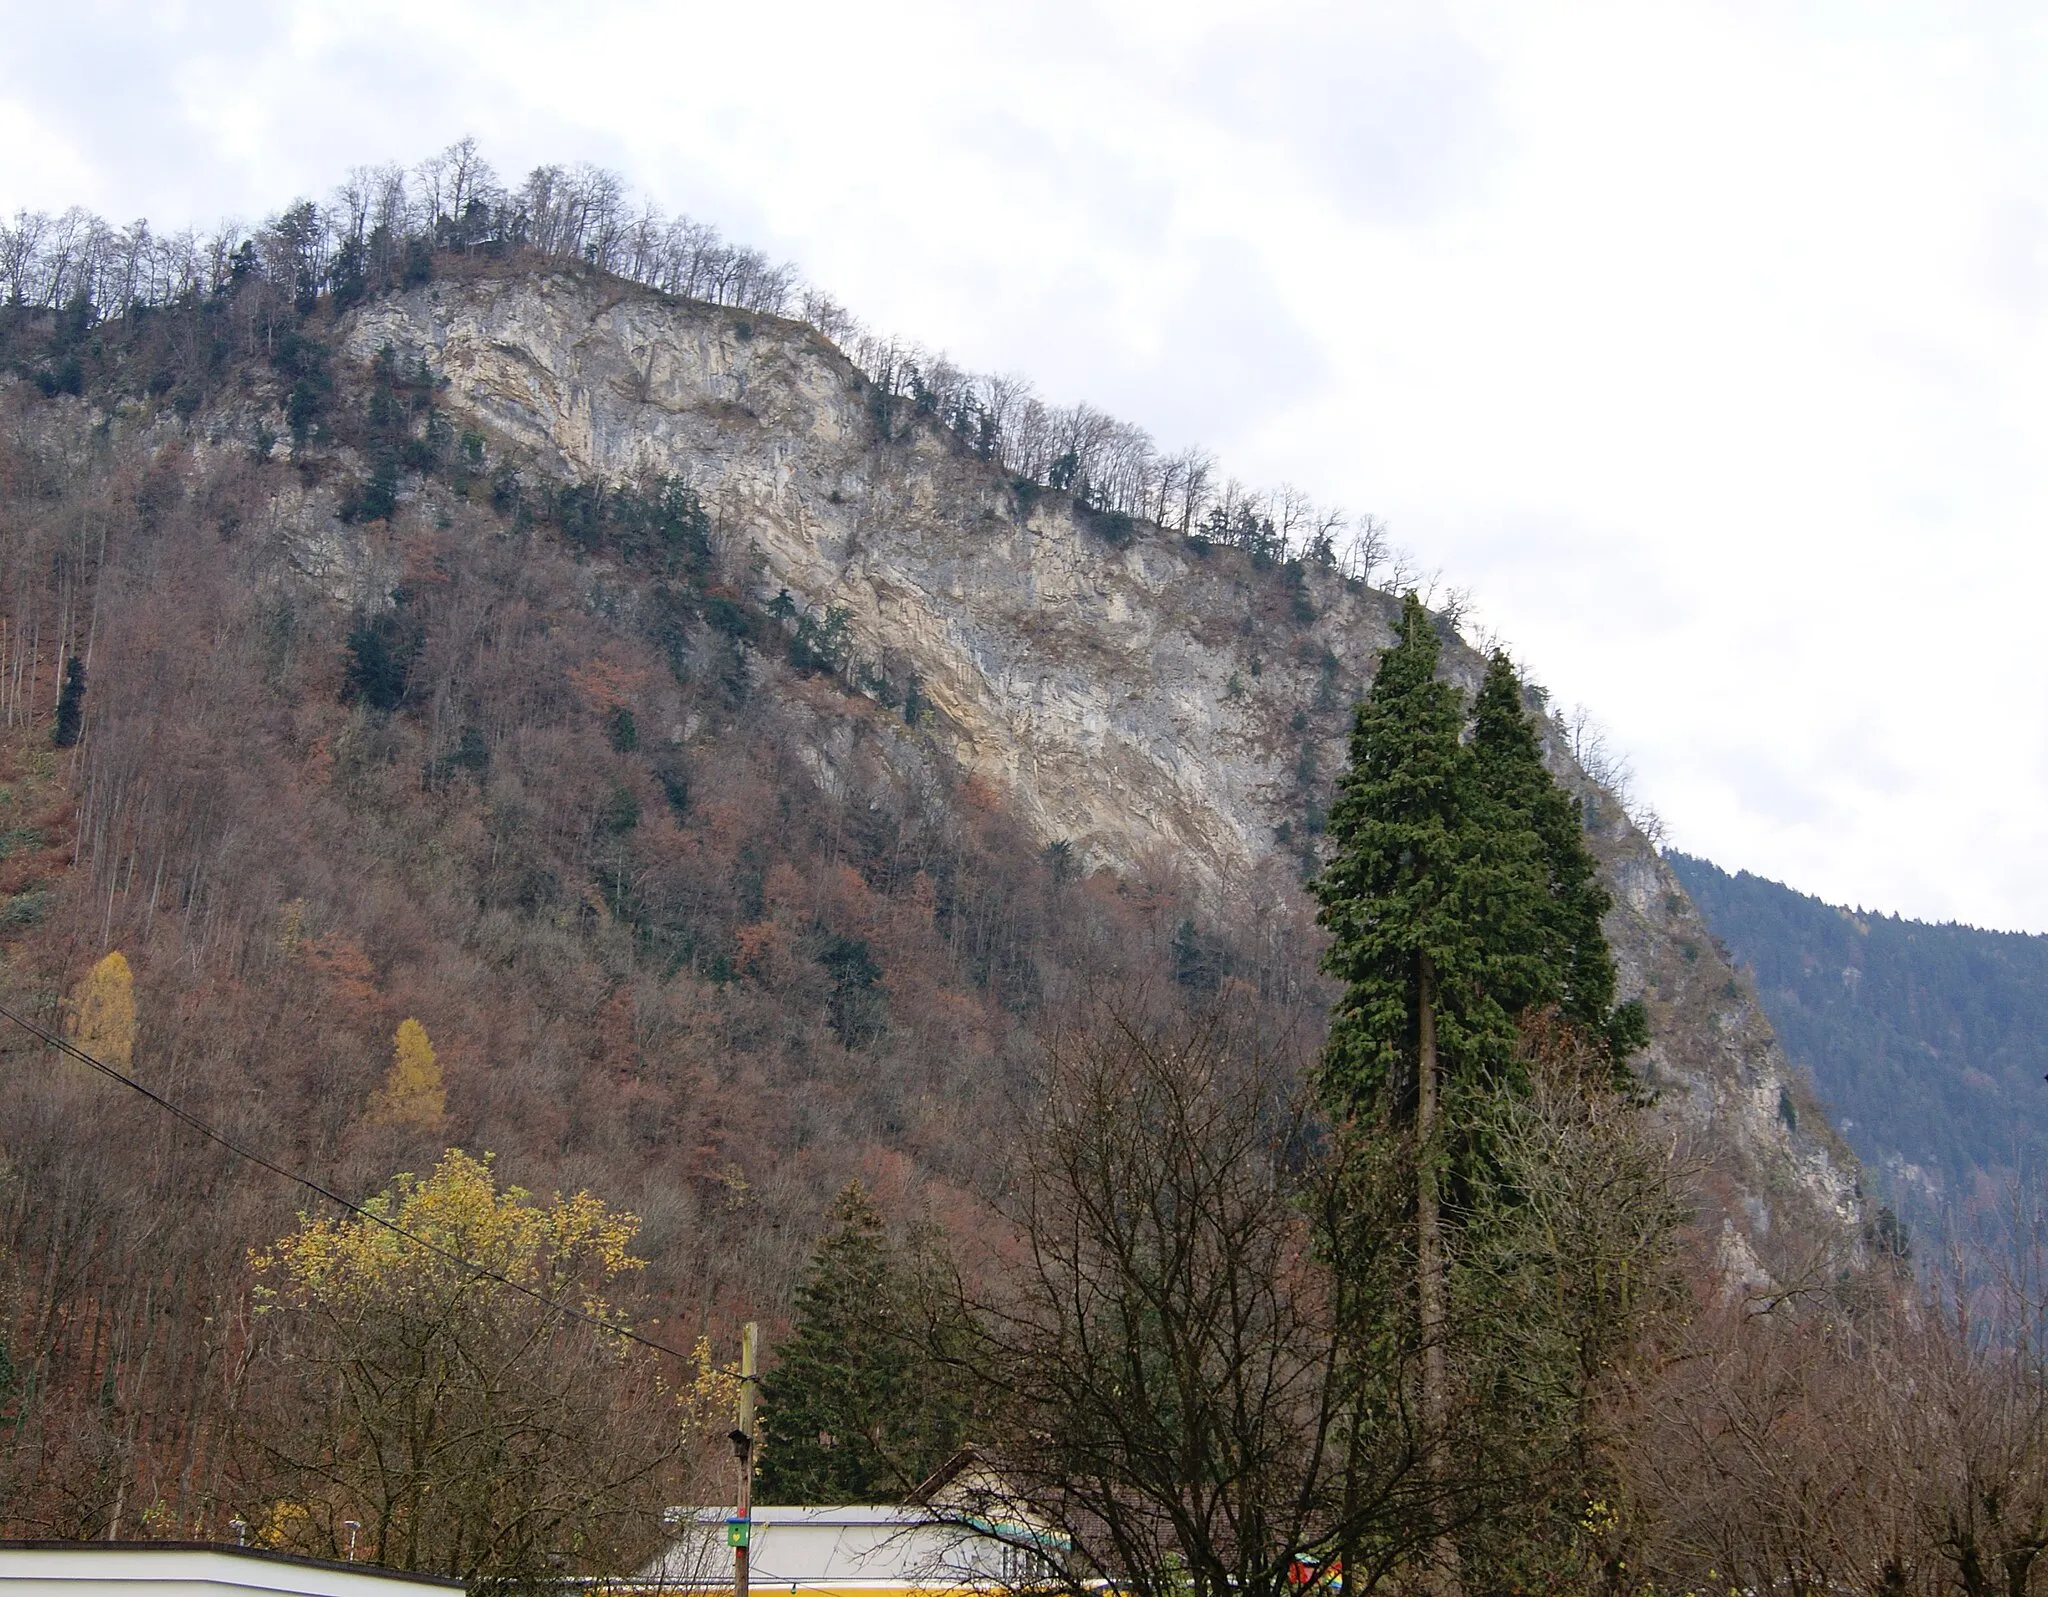 Photo showing: Schlossberg (740 masl), a Part of the Bregenz Forest Mountains, in Hohenems, Vorarlberg, Austria. On the left, are part of the Castle ruin Alt-Ems to see.